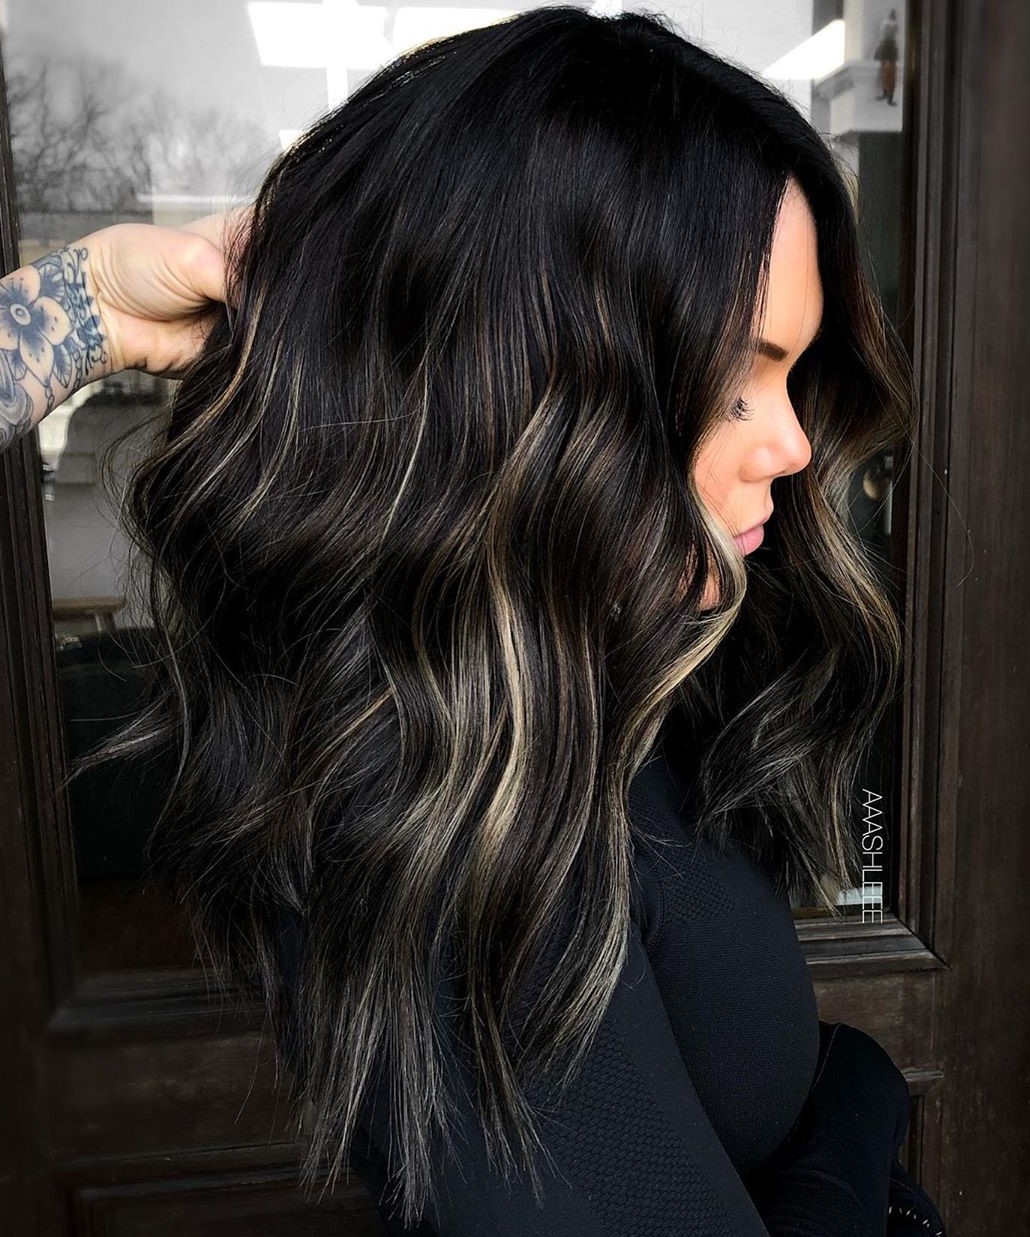 30 Best Gray Hair Color Ideas - Beautiful Gray and Silver Hairstyles